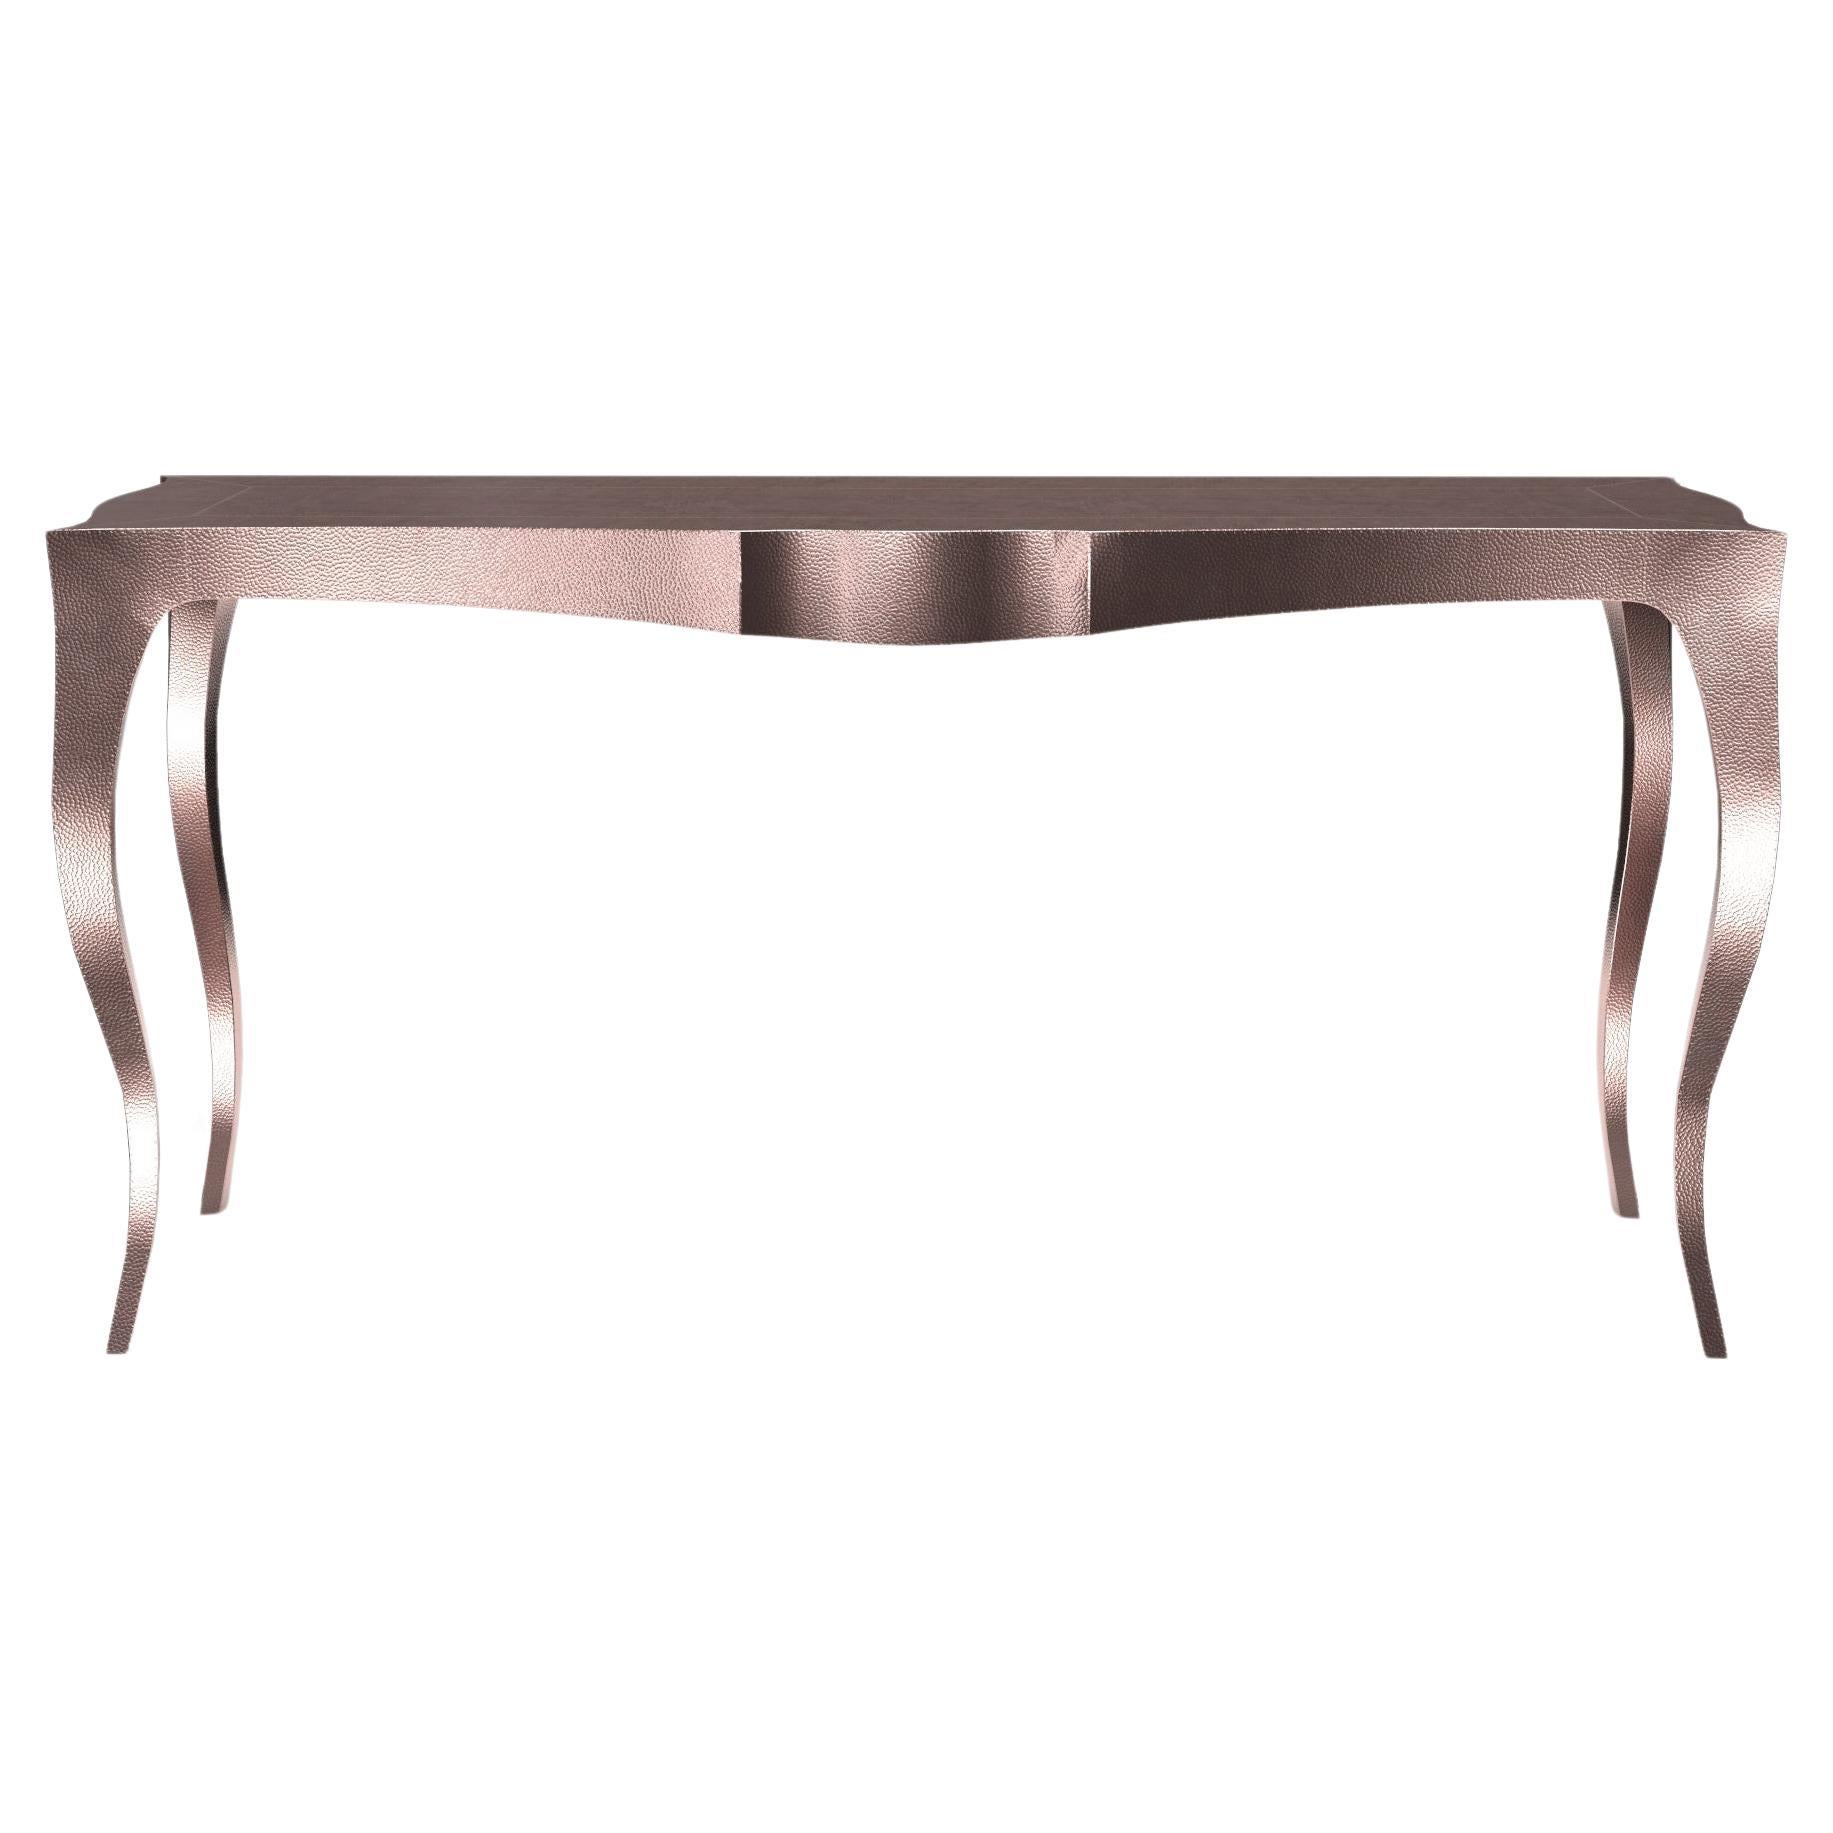 Louise Console Art Deco Industrial and Work Tables Mid. Hammered Copper  For Sale